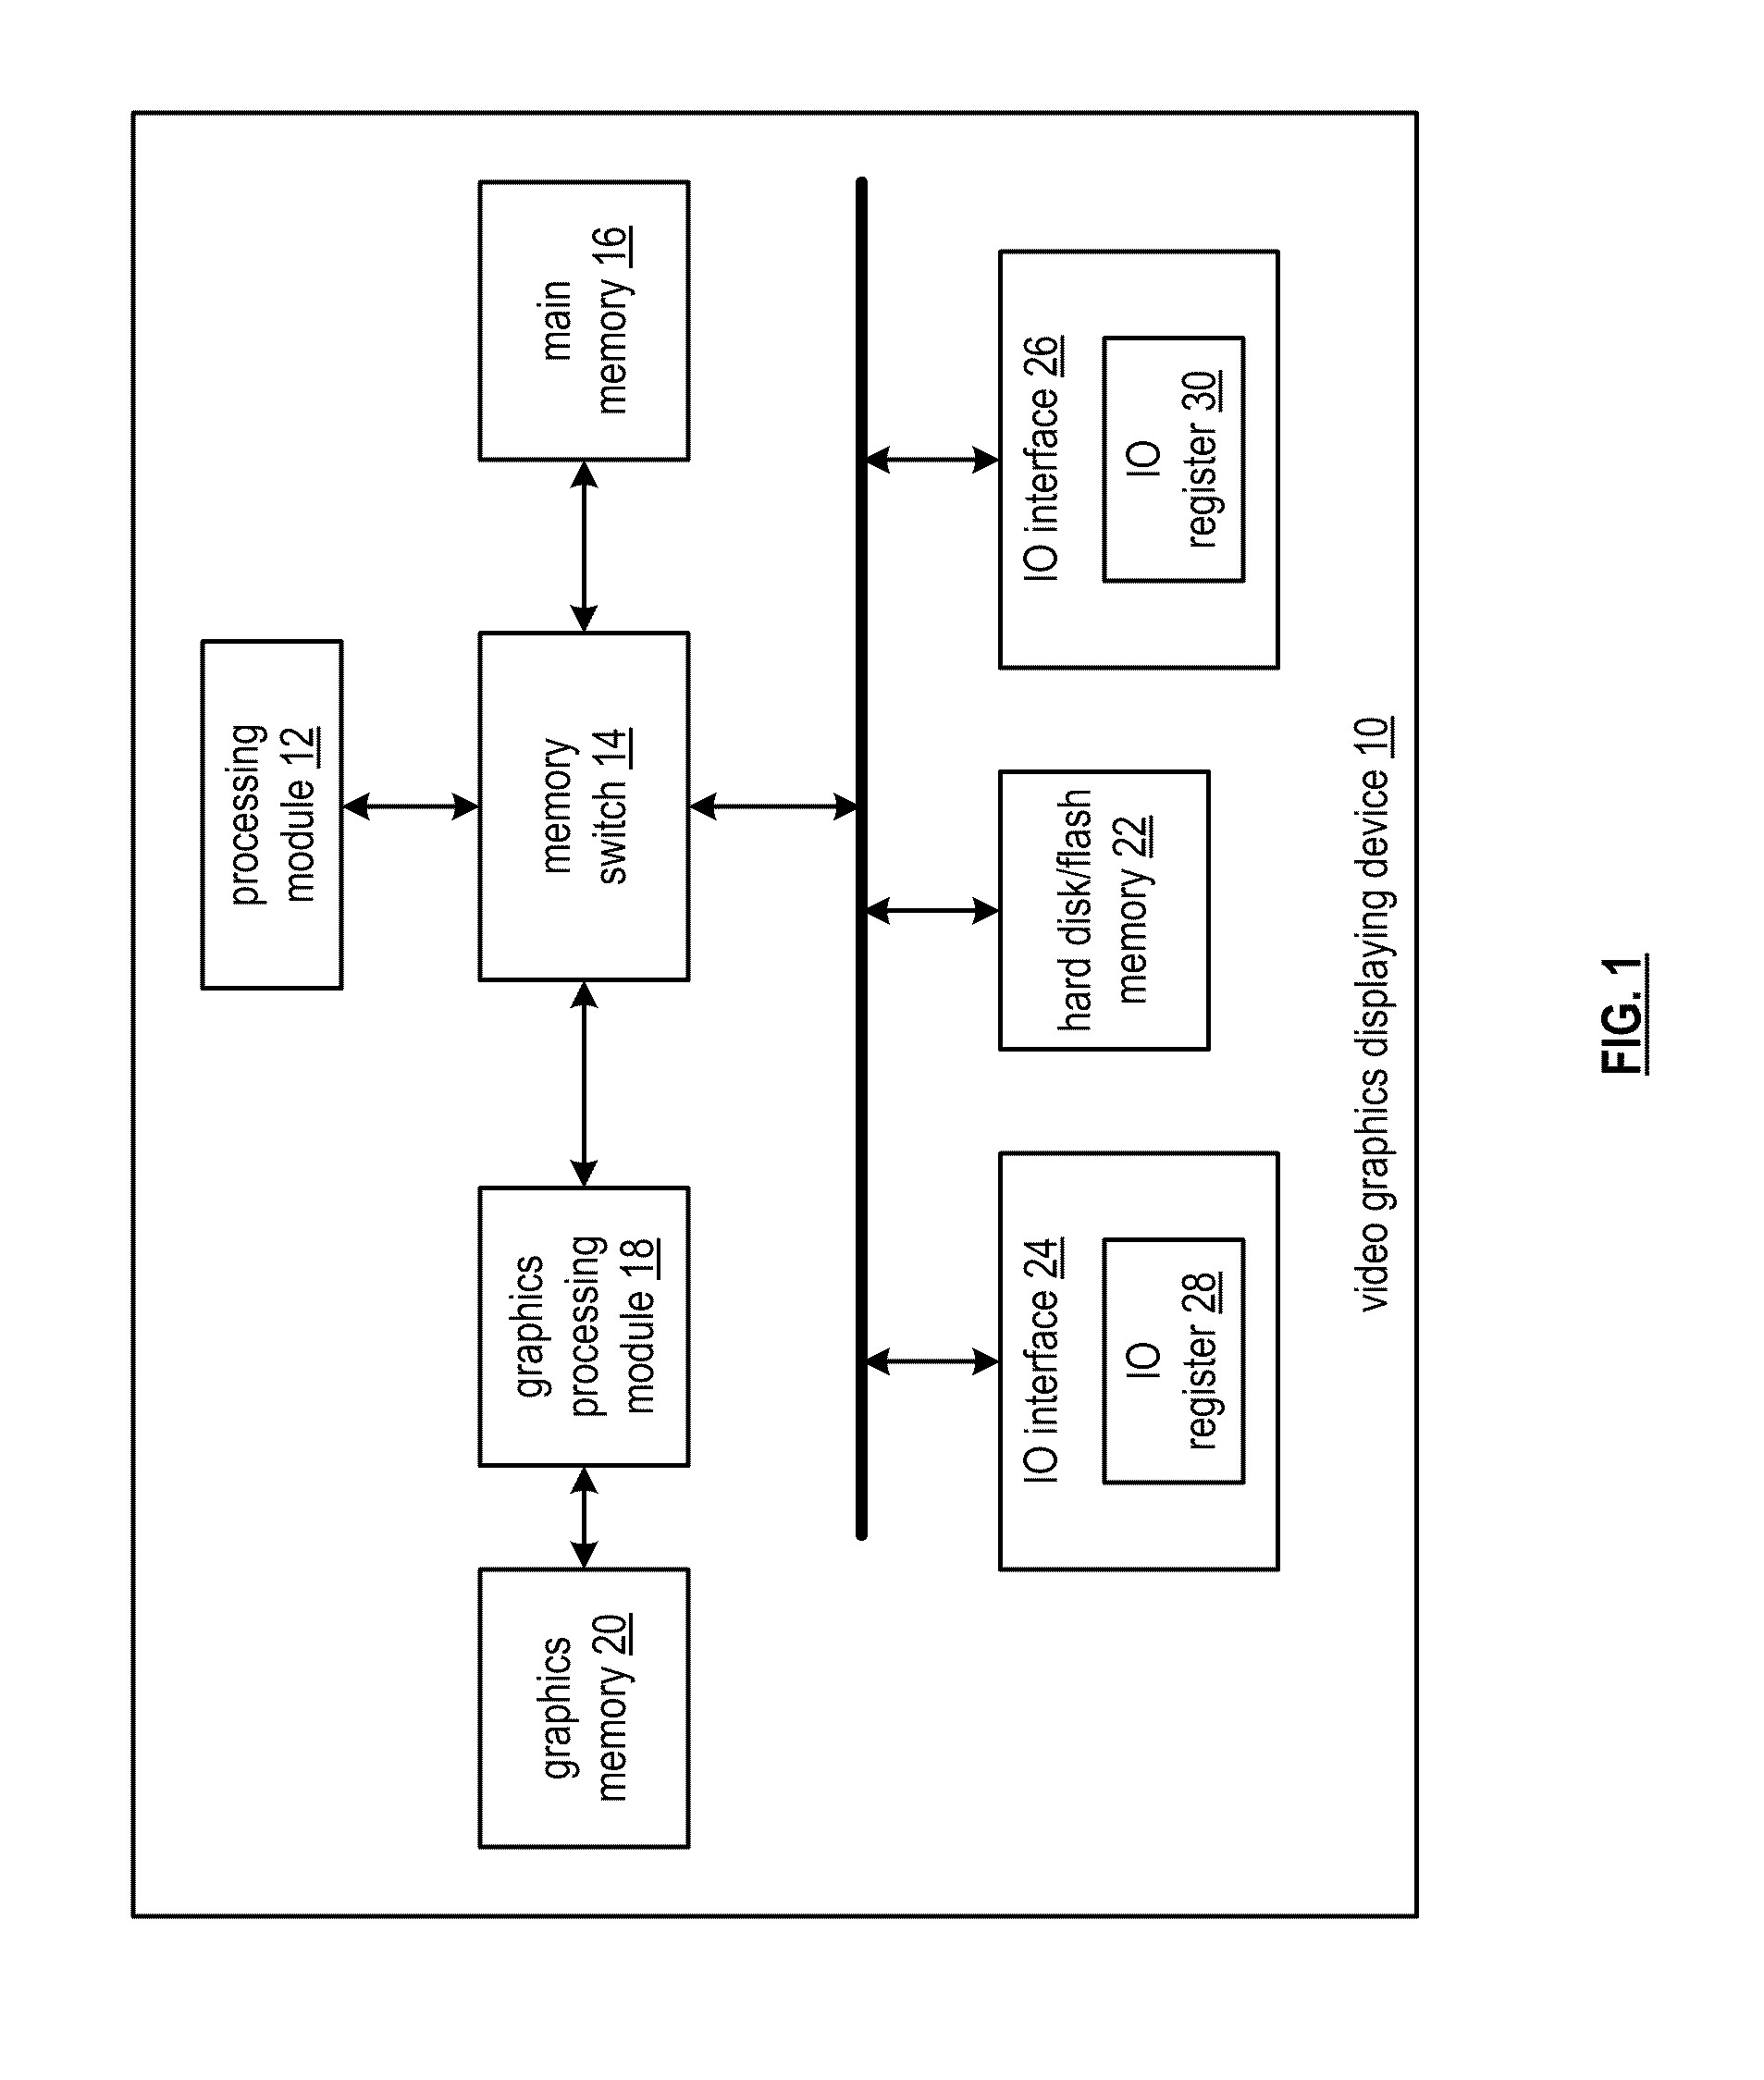 Secure key access with one-time programmable memory and applications thereof